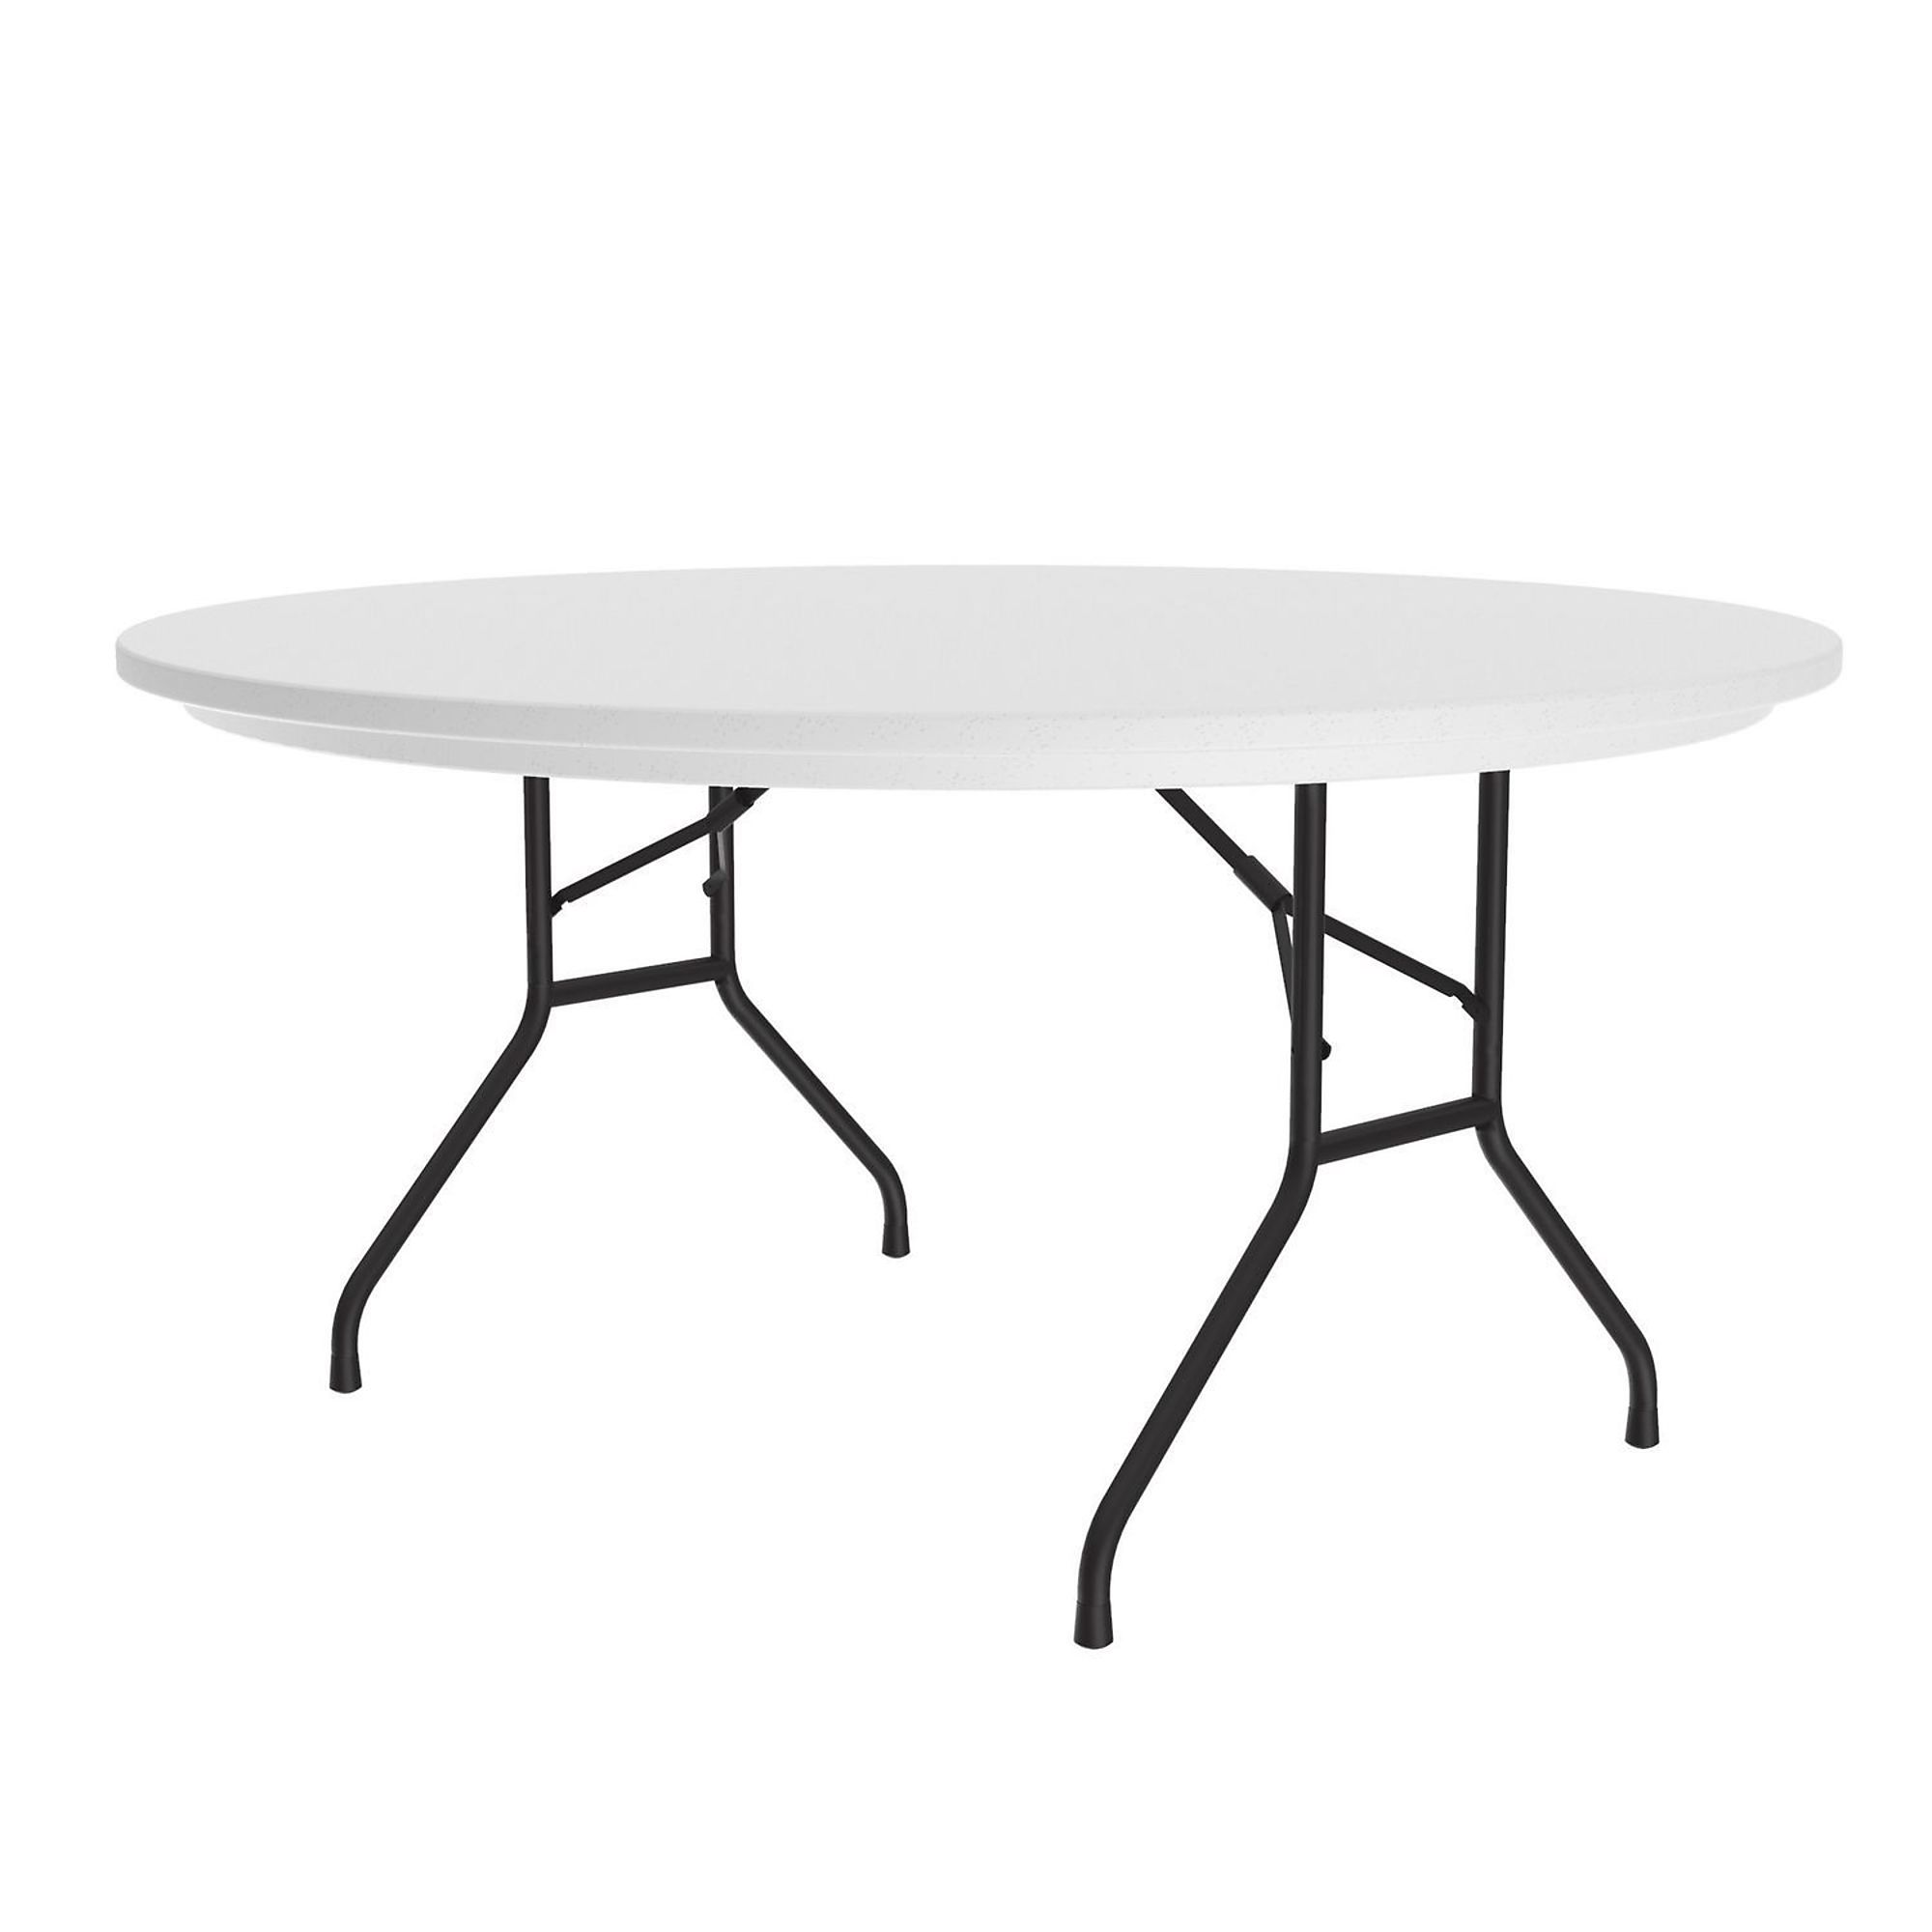 Correll, Plastic Folding Table, Gray Granite Top, 60Inch Rnd, Height 29 in, Width 60 in, Length 60 in, Model R60-23